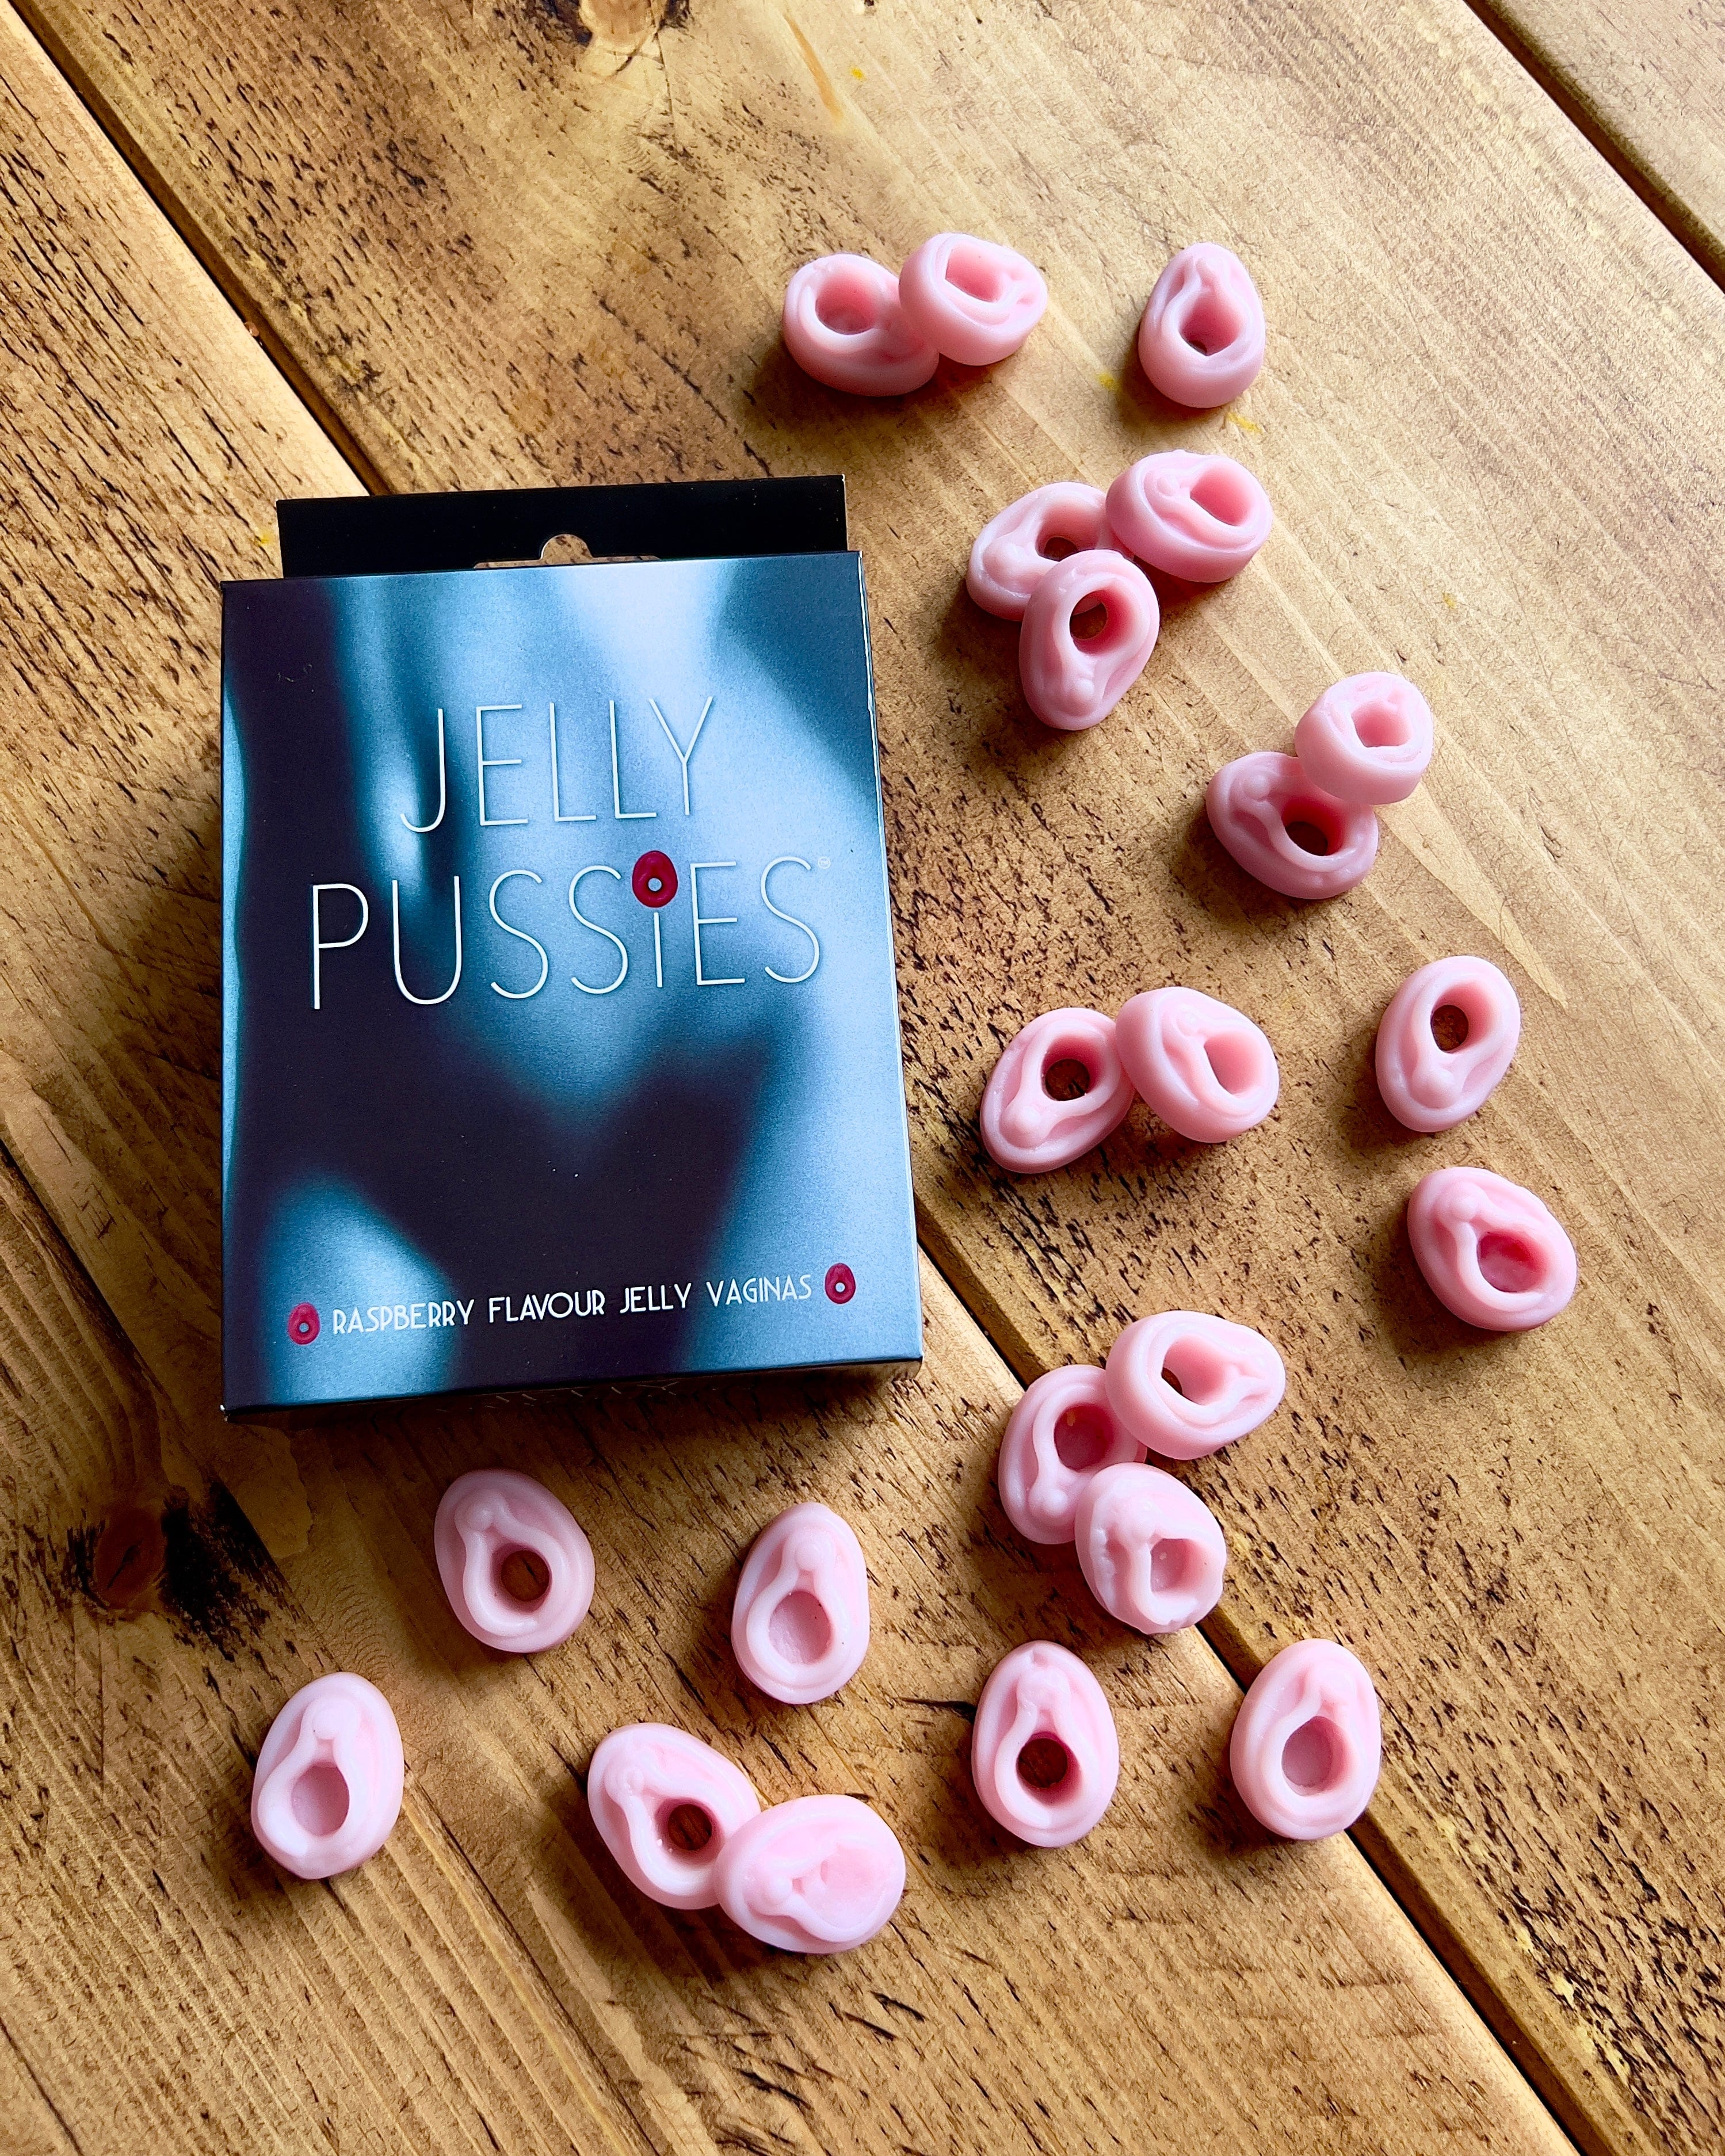 Jelly pussies - novelty adult sweets for those that want a raspberry flavoured jelly vagina